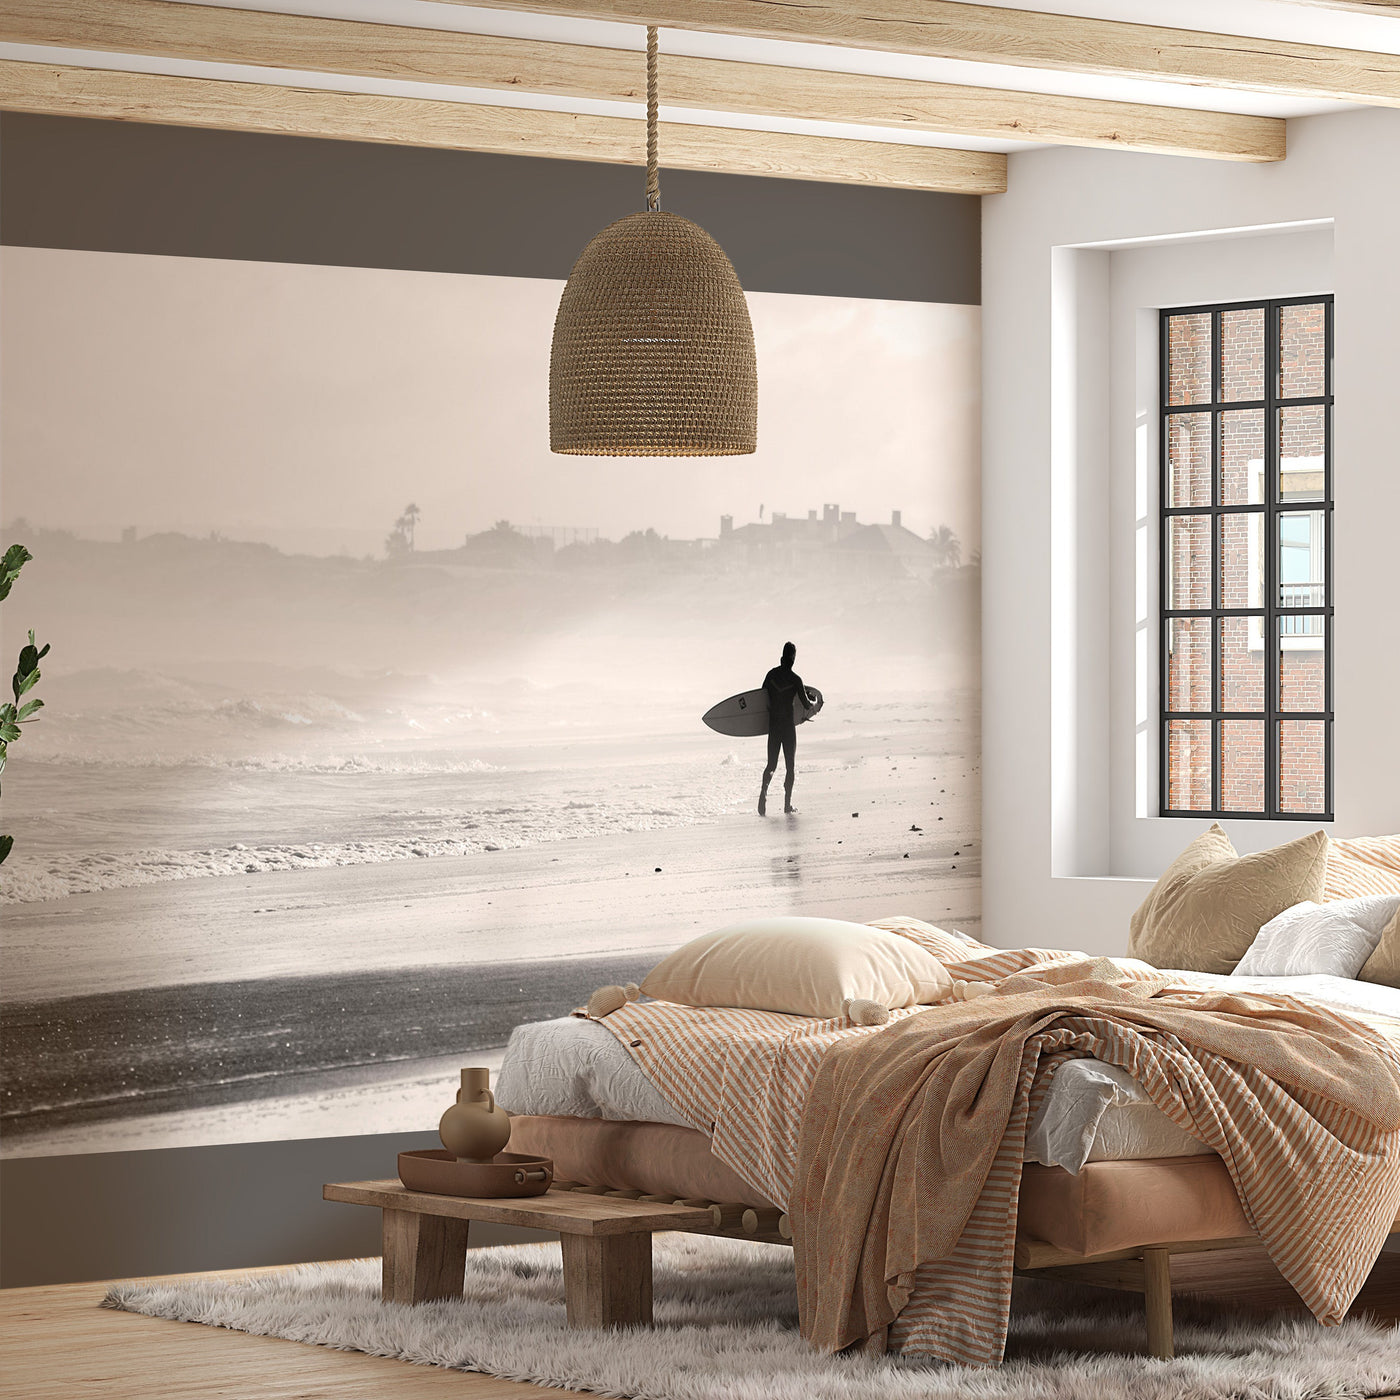 Peel & Stick Beach Wall Mural - Surfer by the Ocean - Removable Wall Decals-Tiptophomedecor